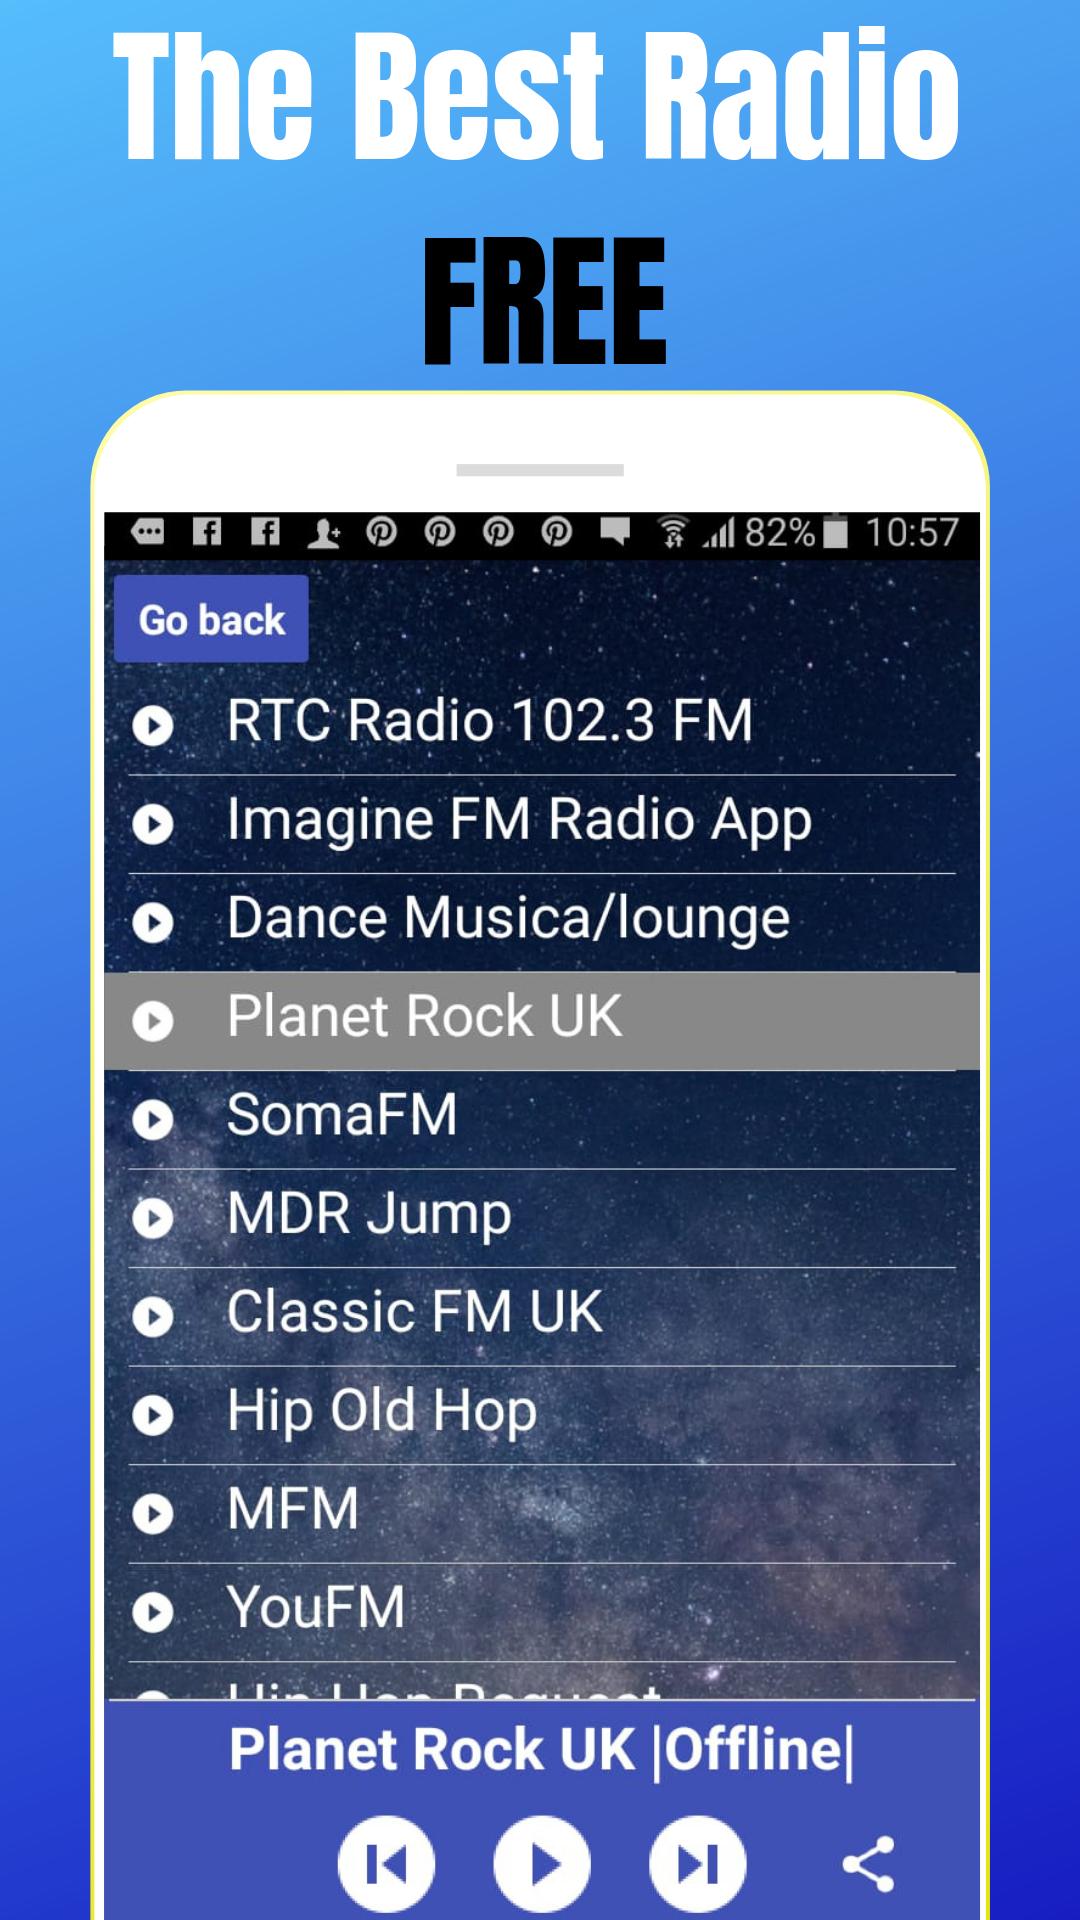 BBC Radio 4 App Live Player Four Free Online UK for Android - APK Download